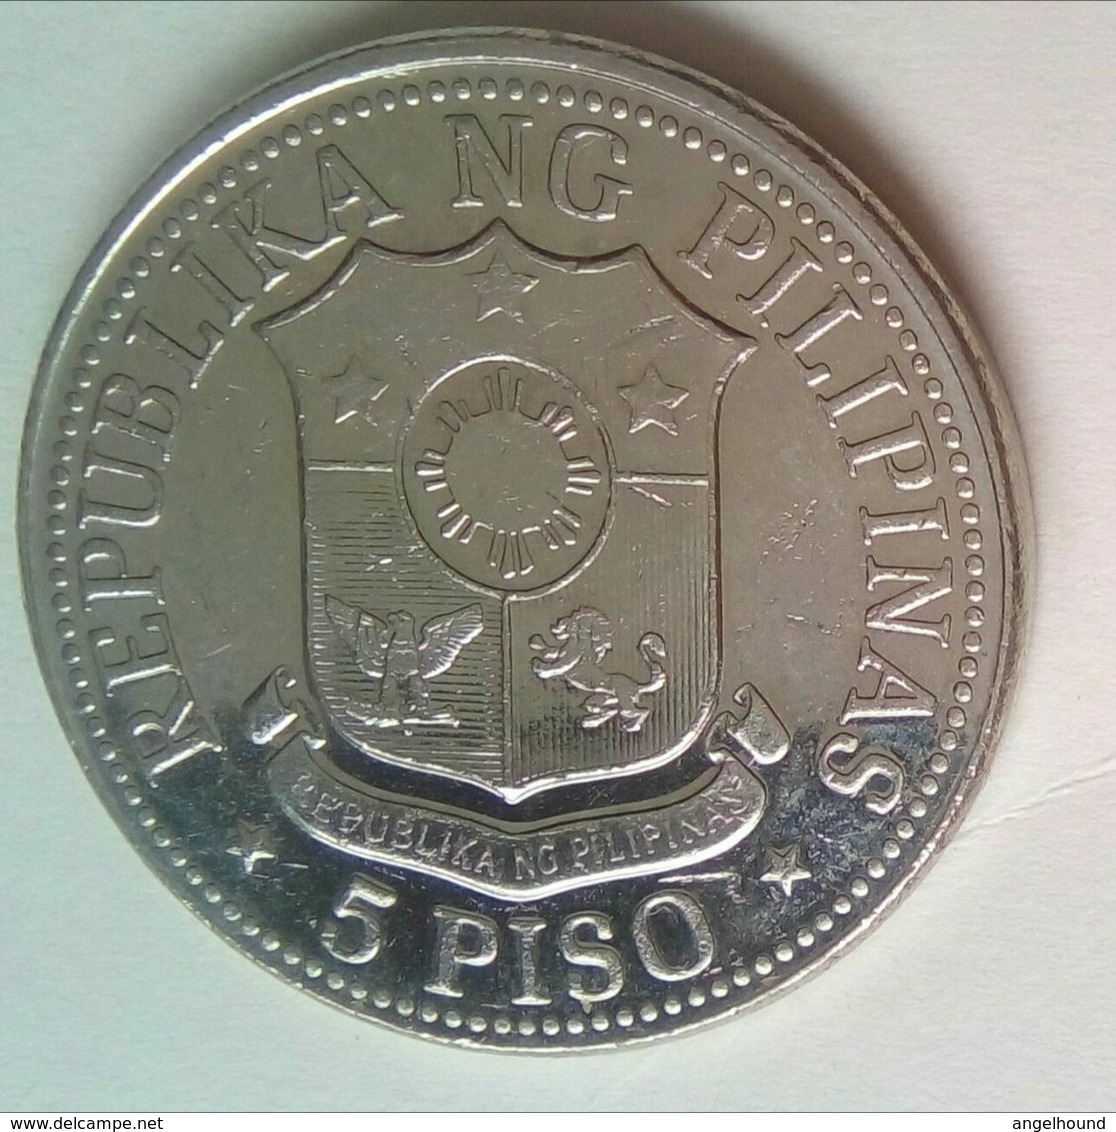 Philippines Marcos 5 Peso Coin 1982 - Philippinen